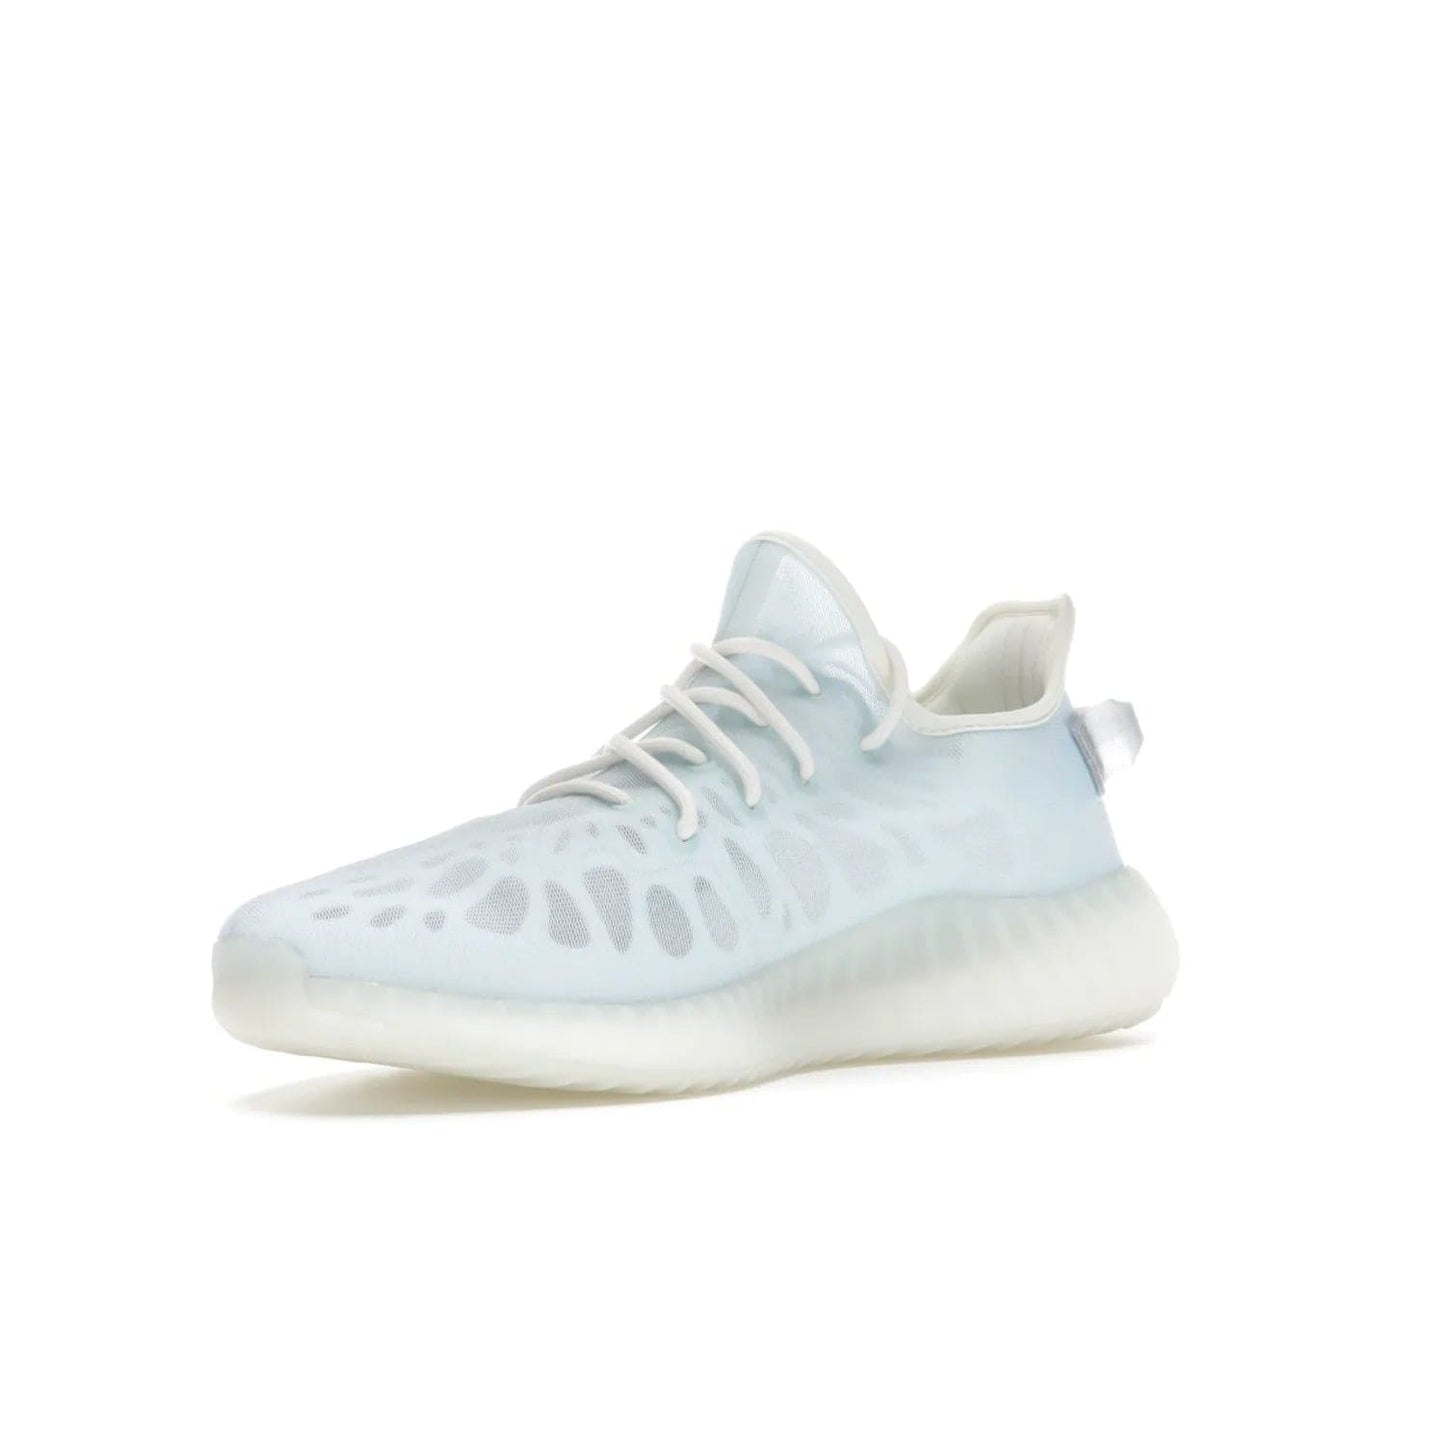 adidas Yeezy Boost 350 V2 Mono Ice - Image 15 - Only at www.BallersClubKickz.com - Introducing the adidas Yeezy 350 V2 Mono Ice - a sleek monofilament mesh design in Ice blue with Boost sole and heel pull tab. Released exclusively in the US for $220.